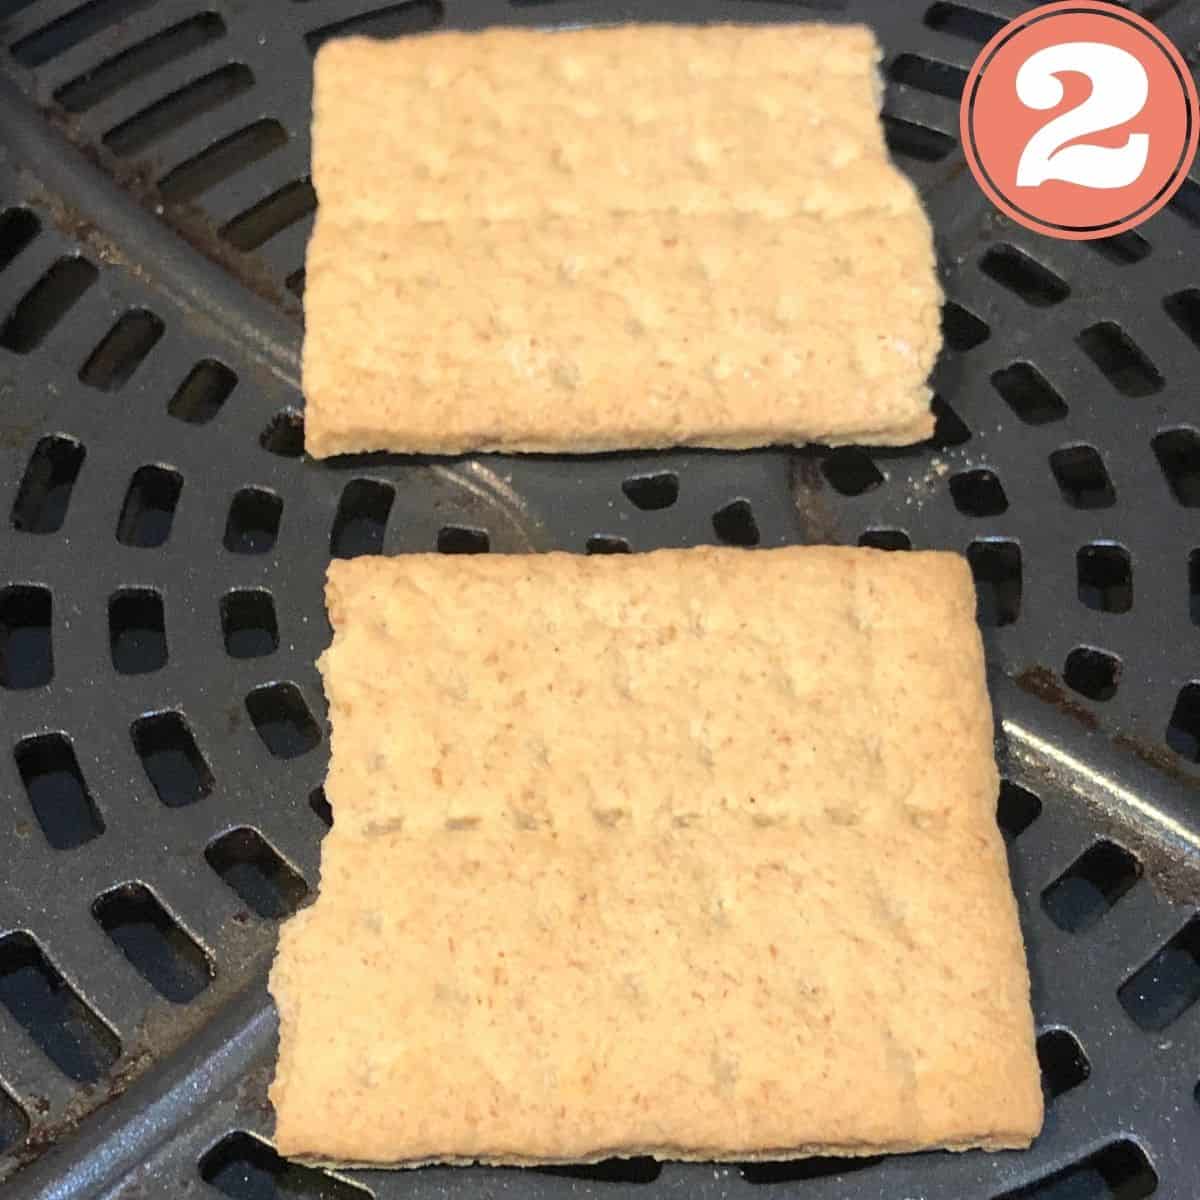 Two Graham crackers in an air fryer basket